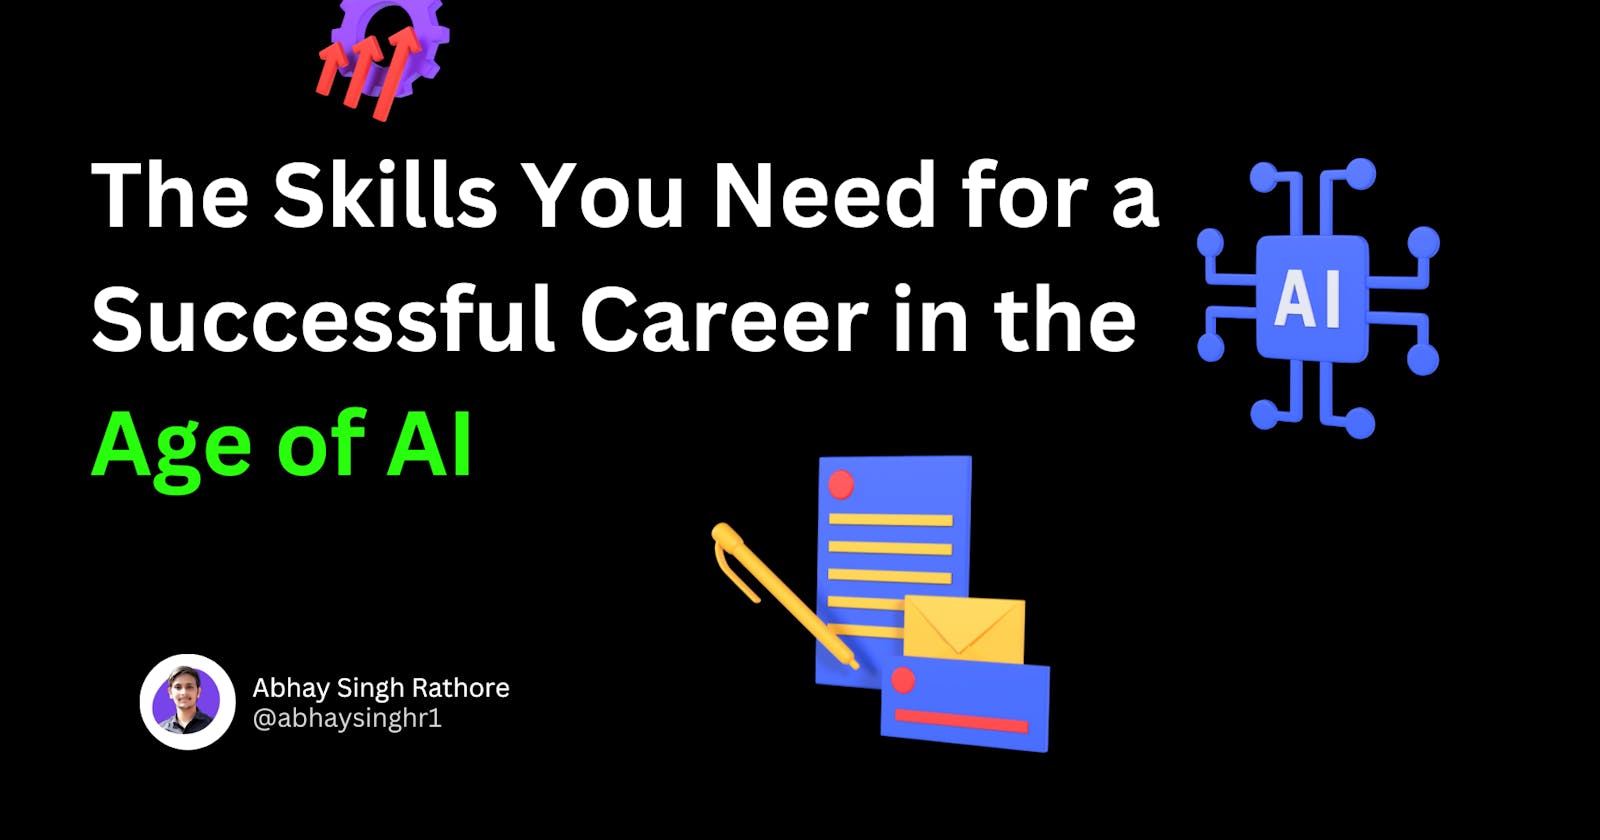 The Skills You Need for a Successful Career in the Age of AI